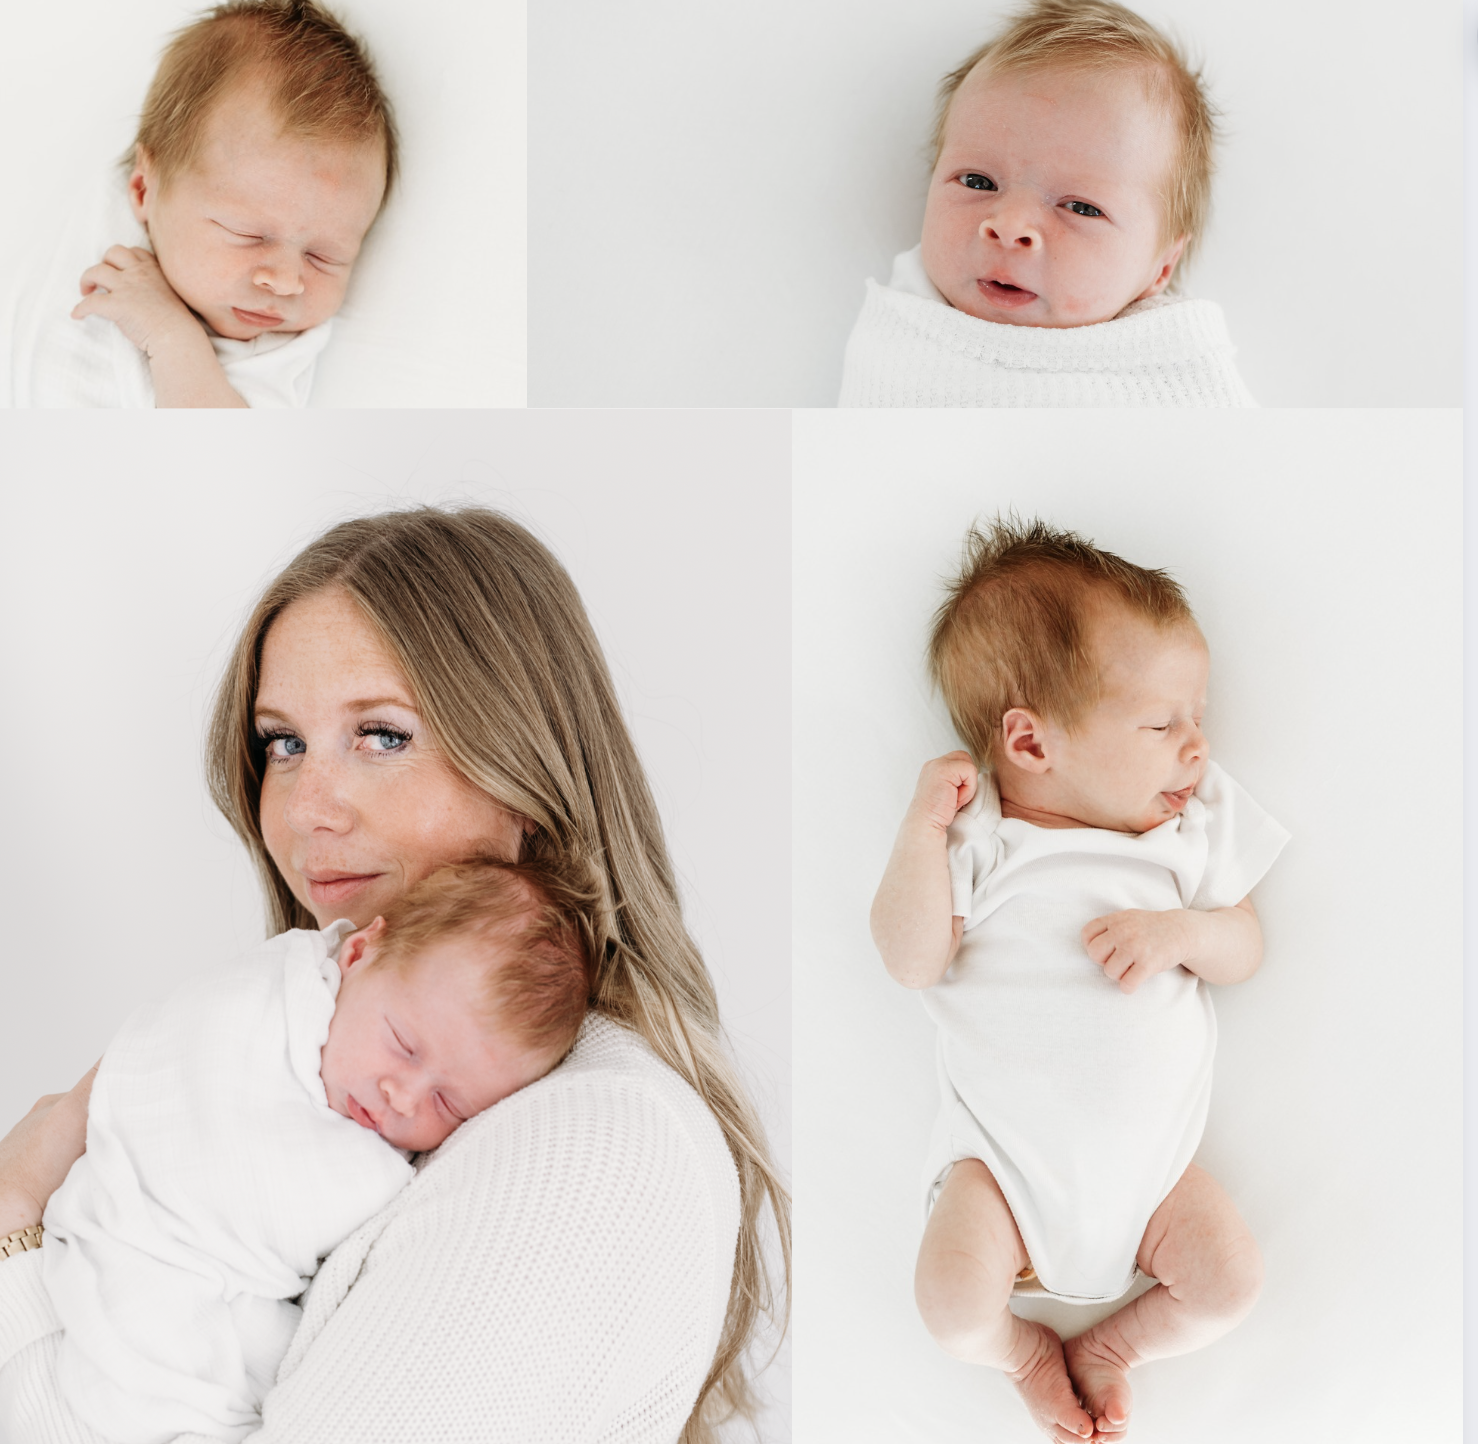 four images a newborn baby in a white outfit